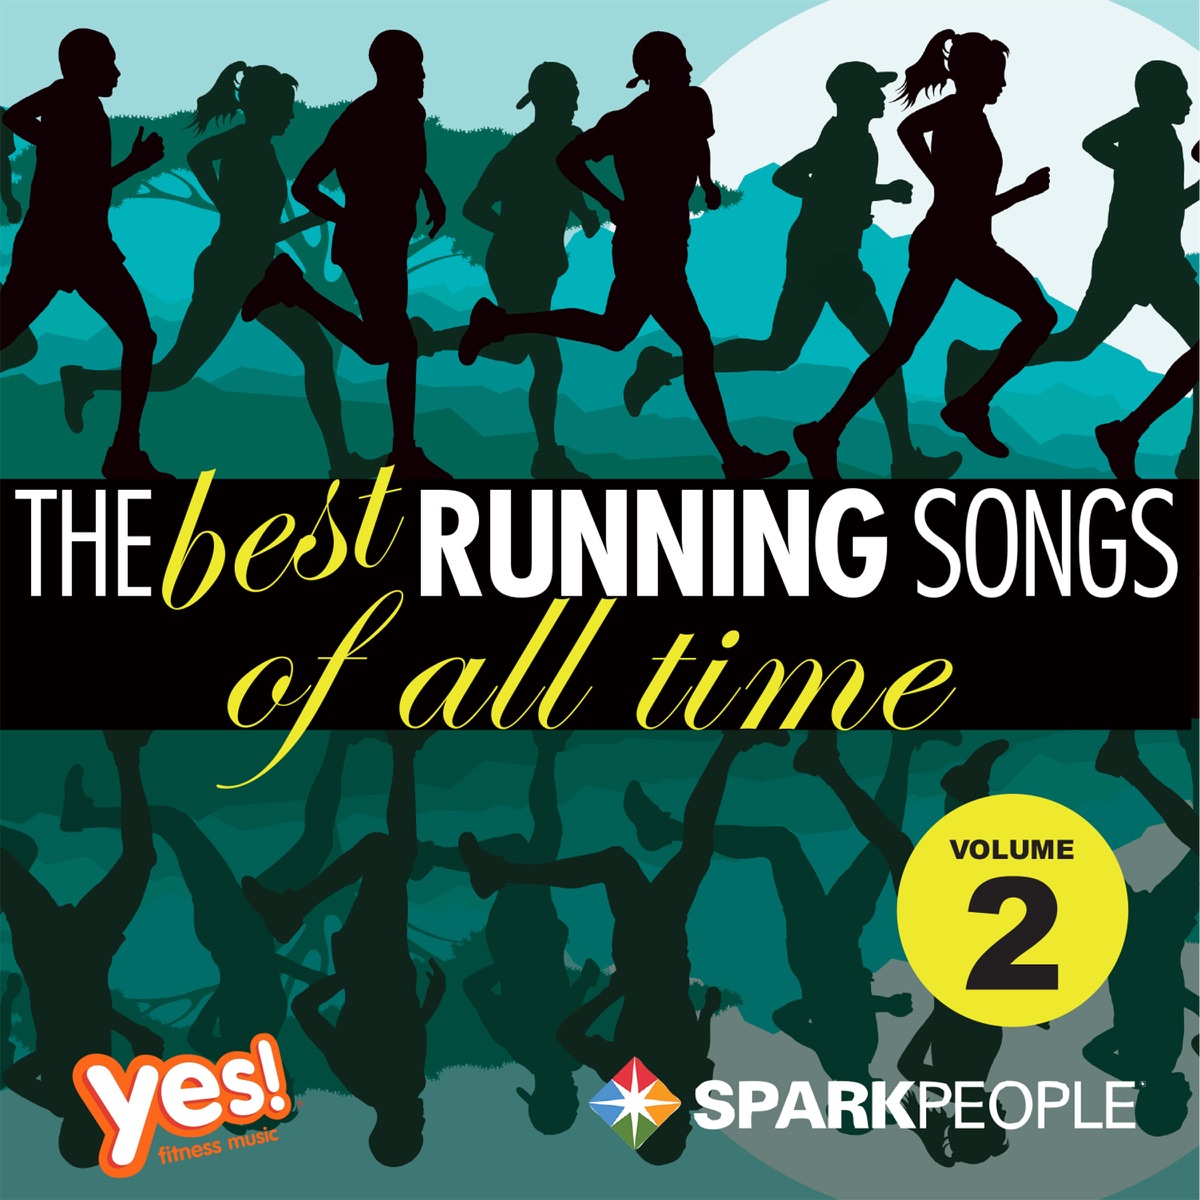 SparkPeople - The Best Running Songs of All Time Vol. 2 (Non-Stop mix @  140-162BPM) - Album by Yes Fitness Music - Apple Music